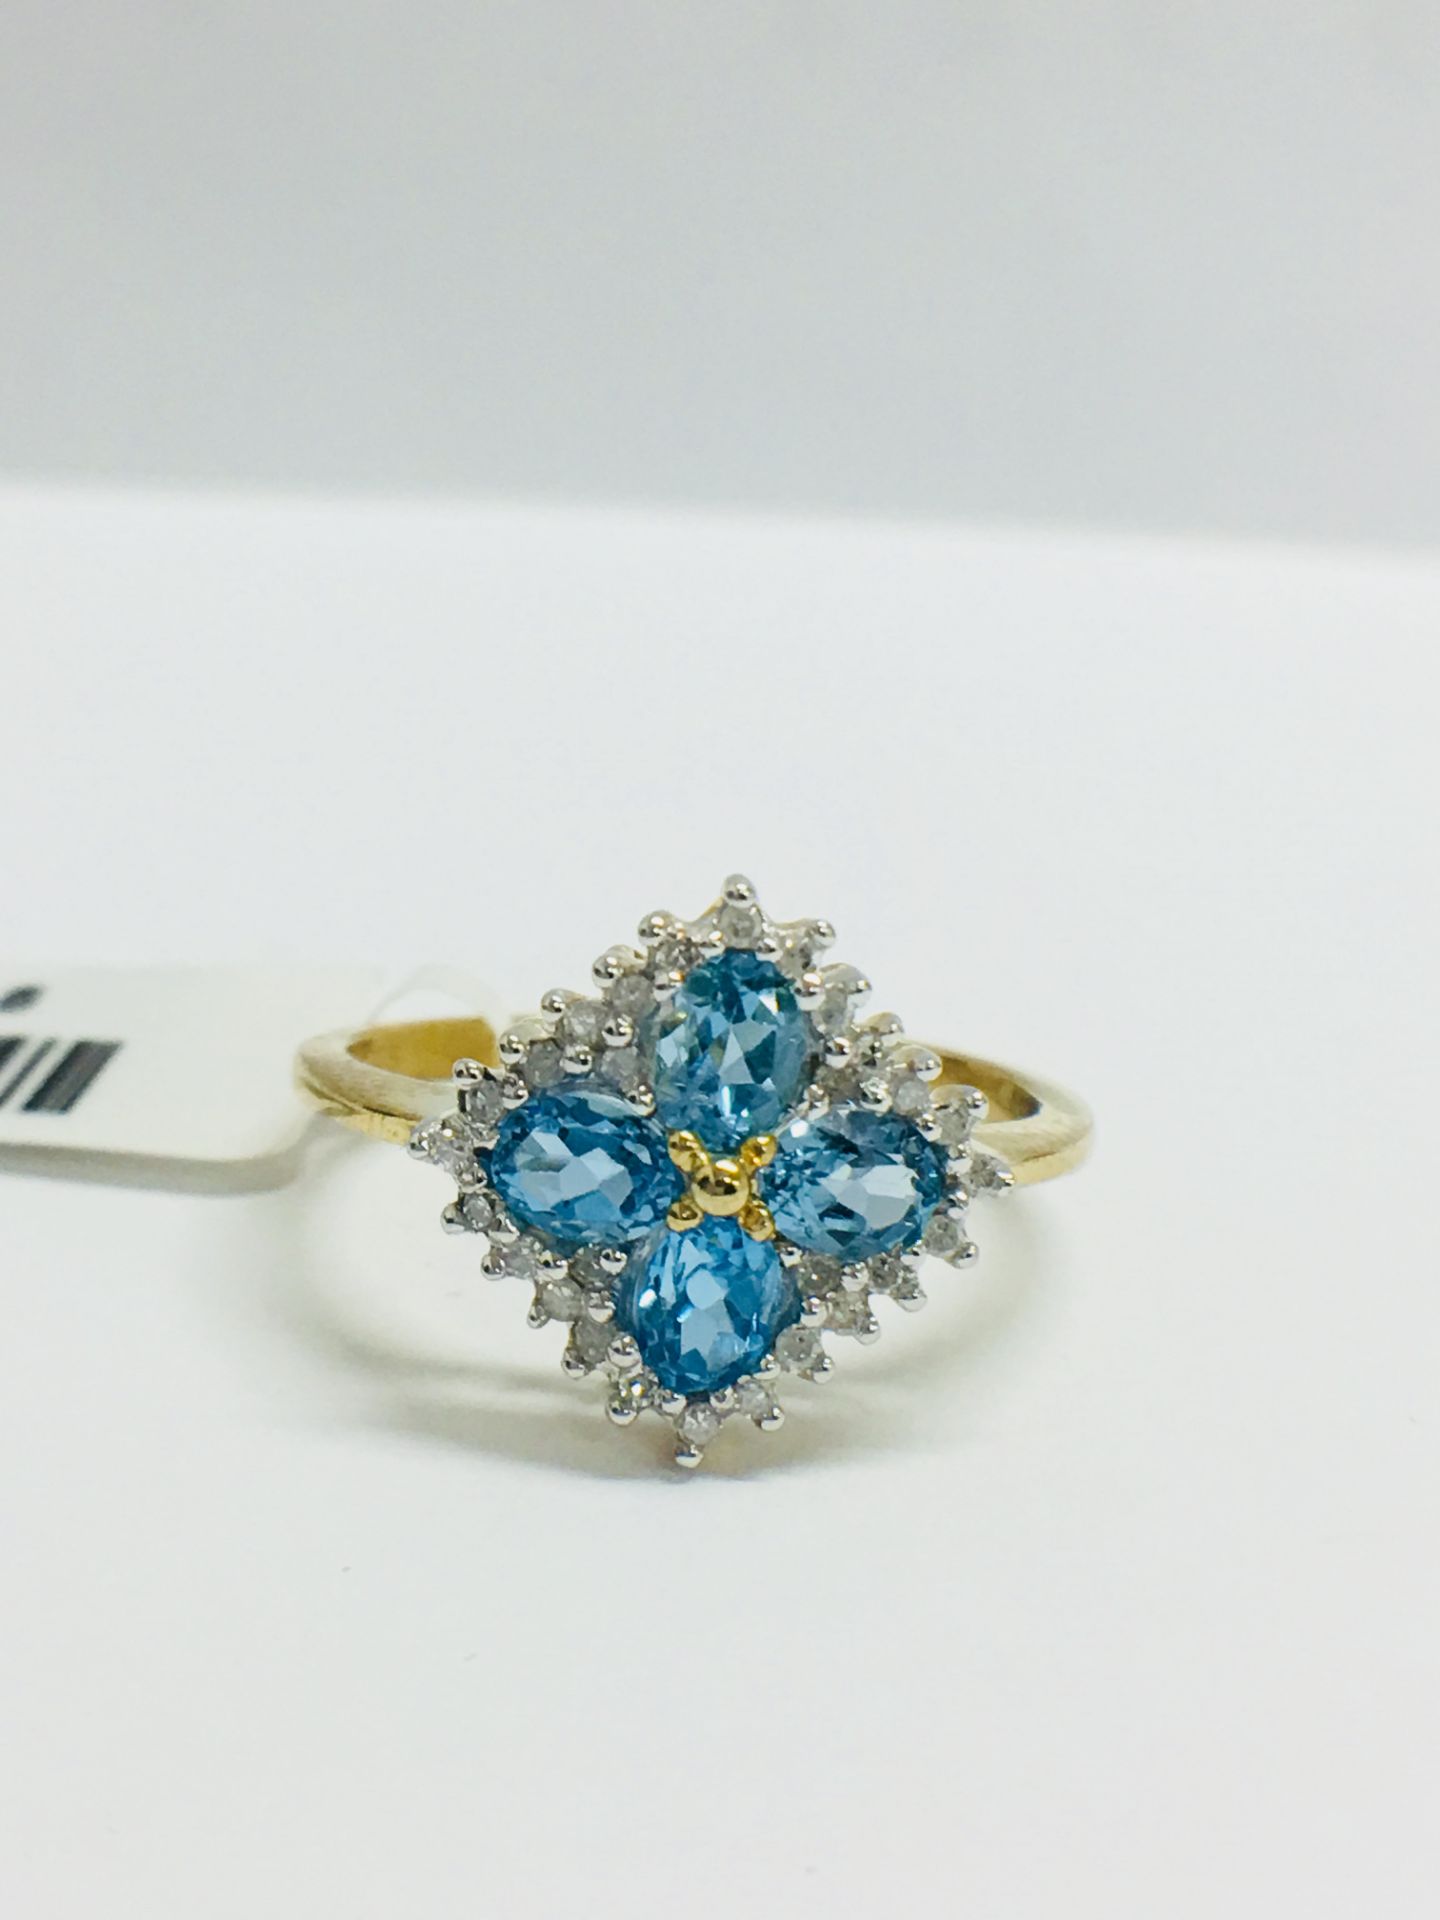 9Ct Yellow Gold Blue Topaz Diamond Cluster Ring - Image 9 of 9